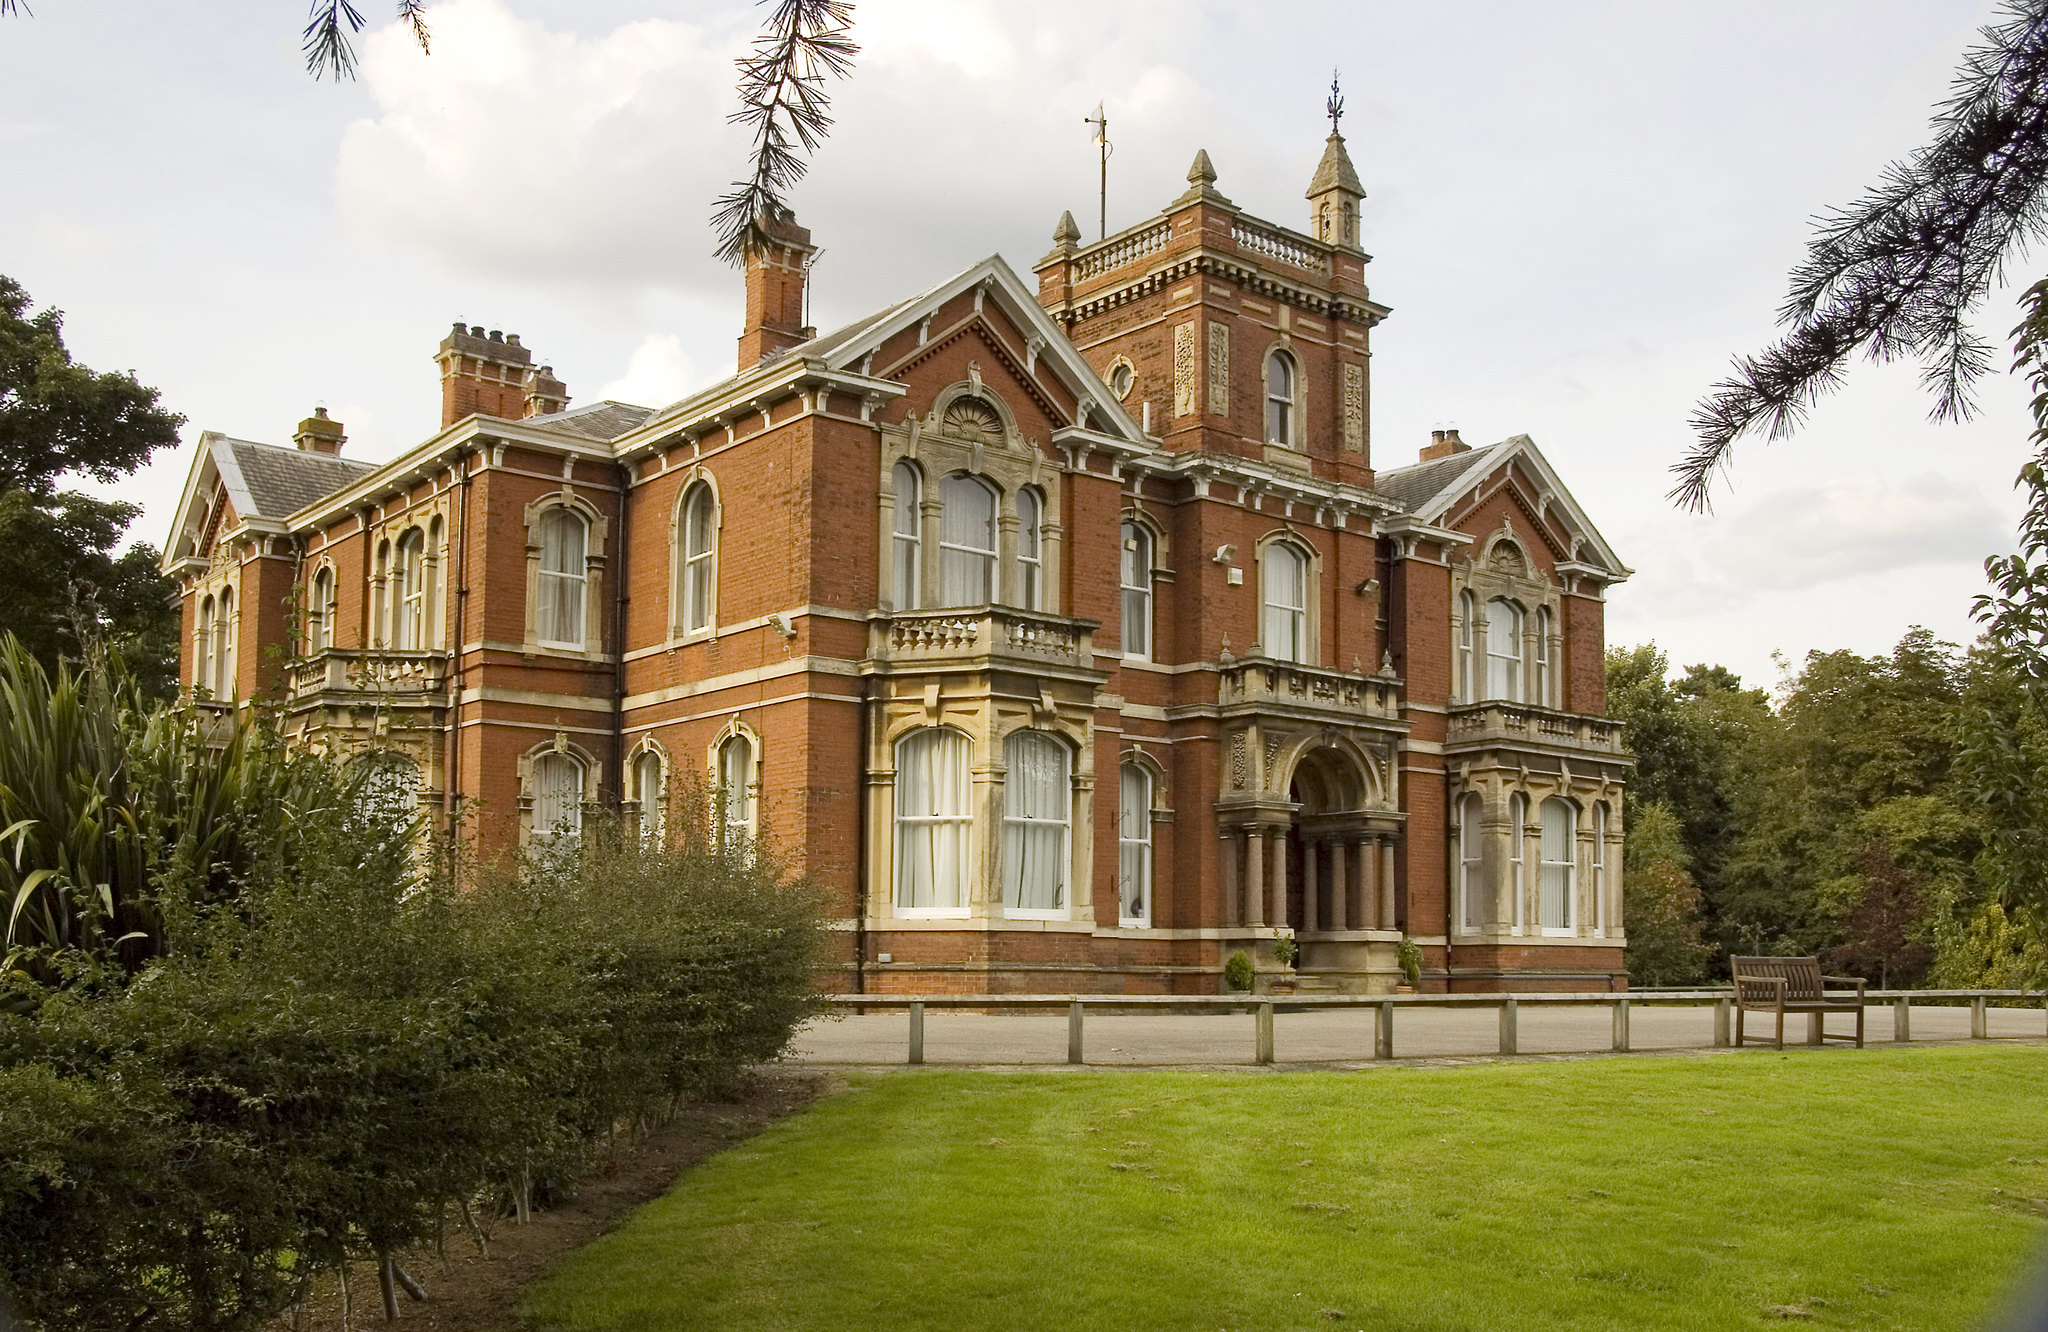  Discover Grimsby’s hidden history at the Weelsby Hall Heritage Open Day 